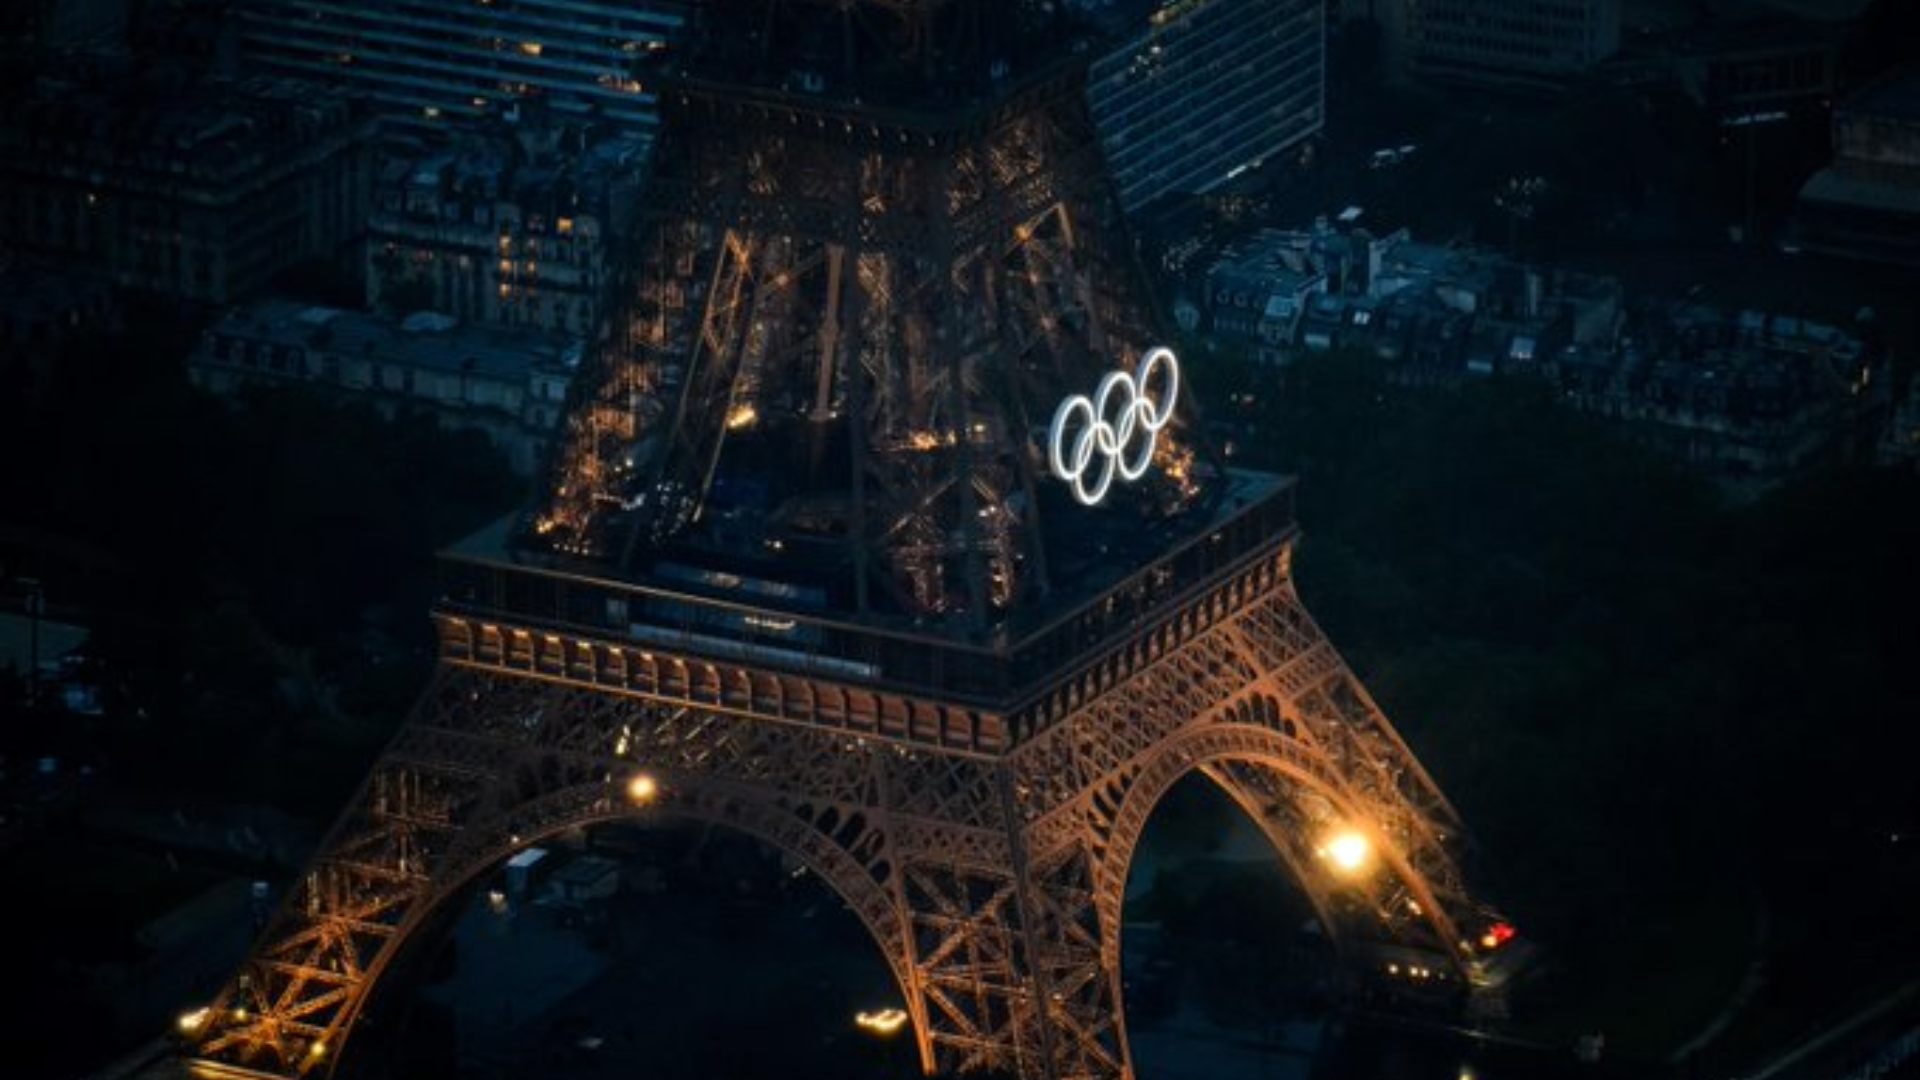 Paris Olympics 2024: Takeaways From The Opening Ceremony, From Surprises To Performances